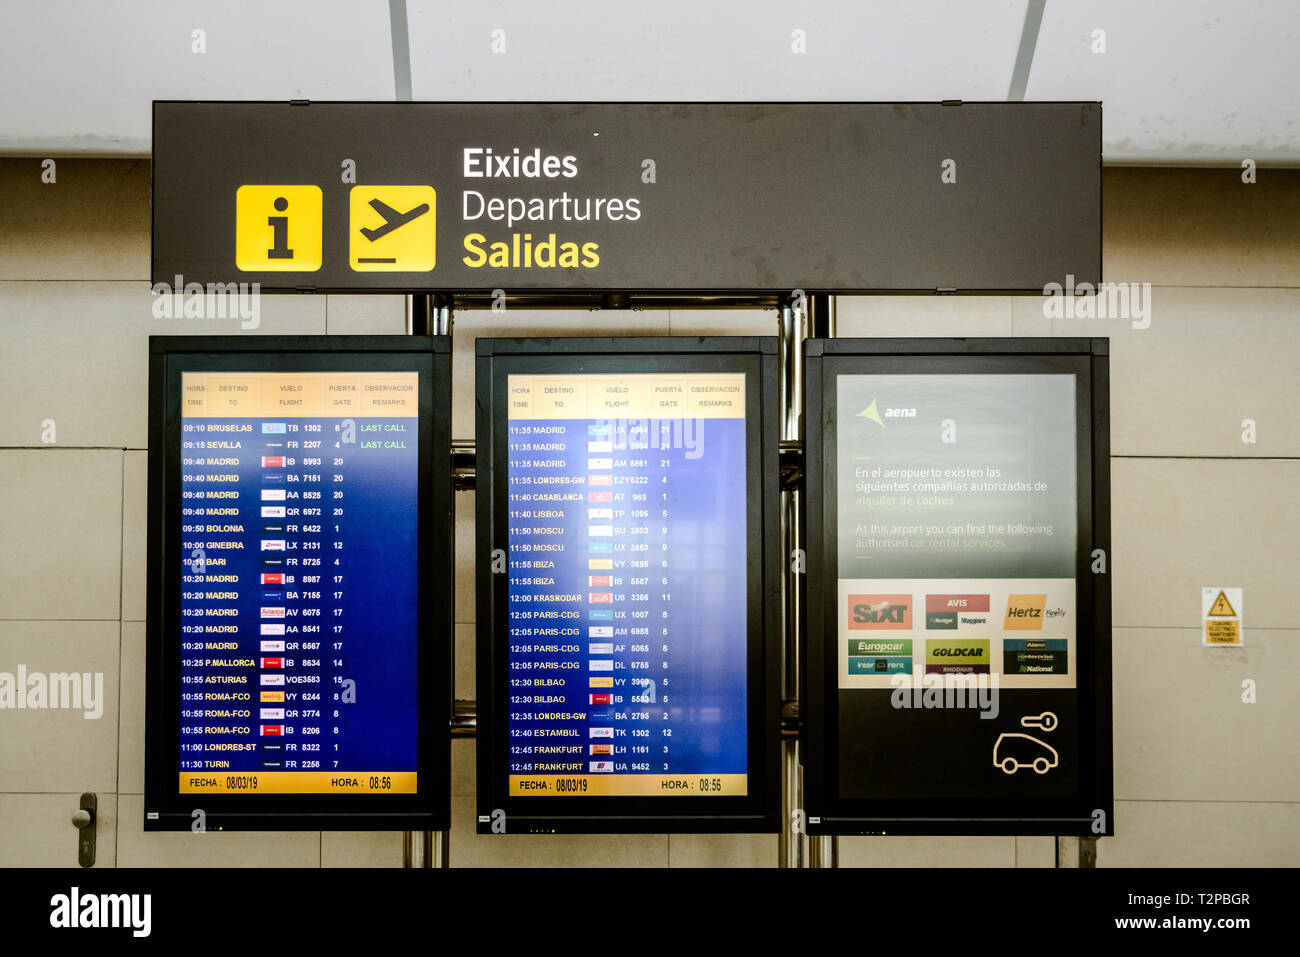 Valencia, Spain - March 8, 2019: Led information panel with flight schedules arrivals departures at a Spanish airport during the holidays. Stock Photo